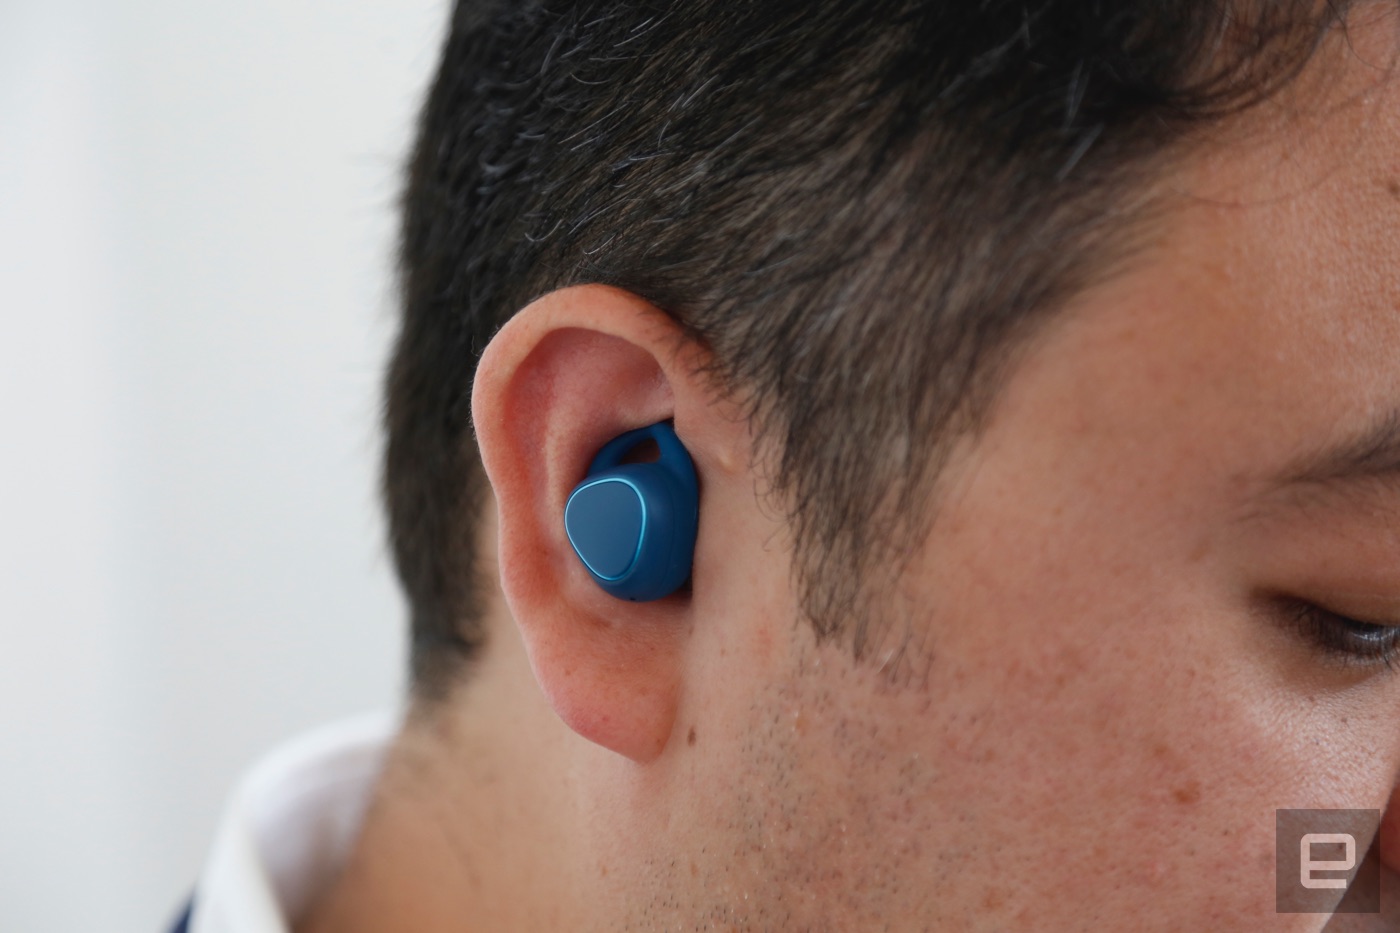 Samsung&#039;s new smart earbuds track your steps and heart rate